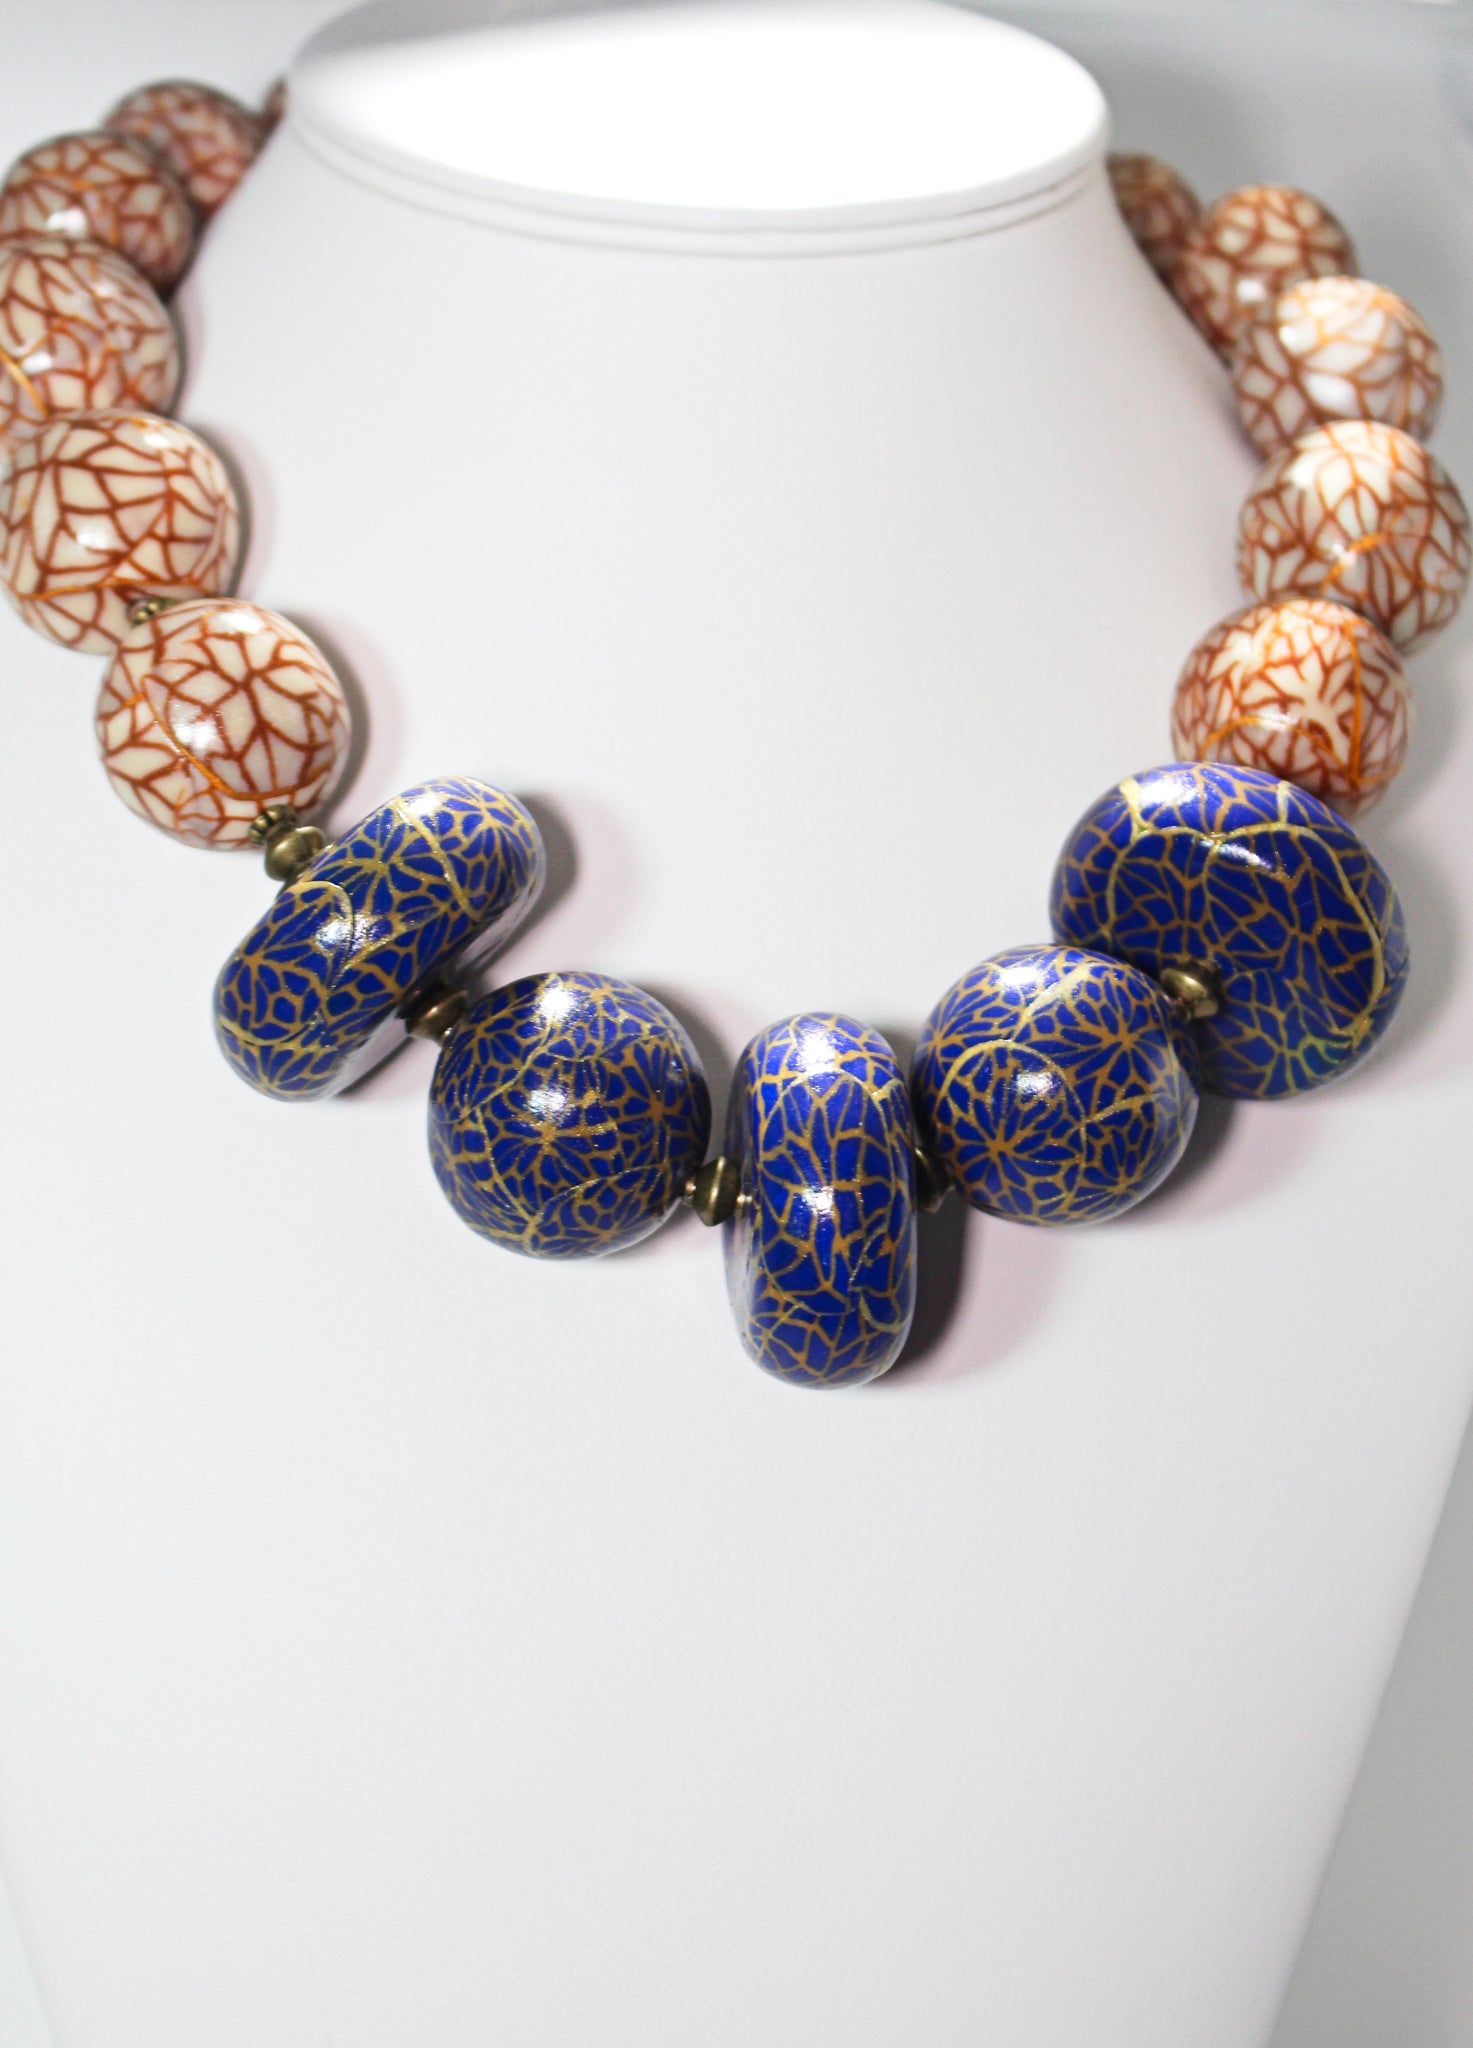 KD-0108 Chunky Artisan Statement Choker Necklace #1 (Limited Series) Blue/Gold